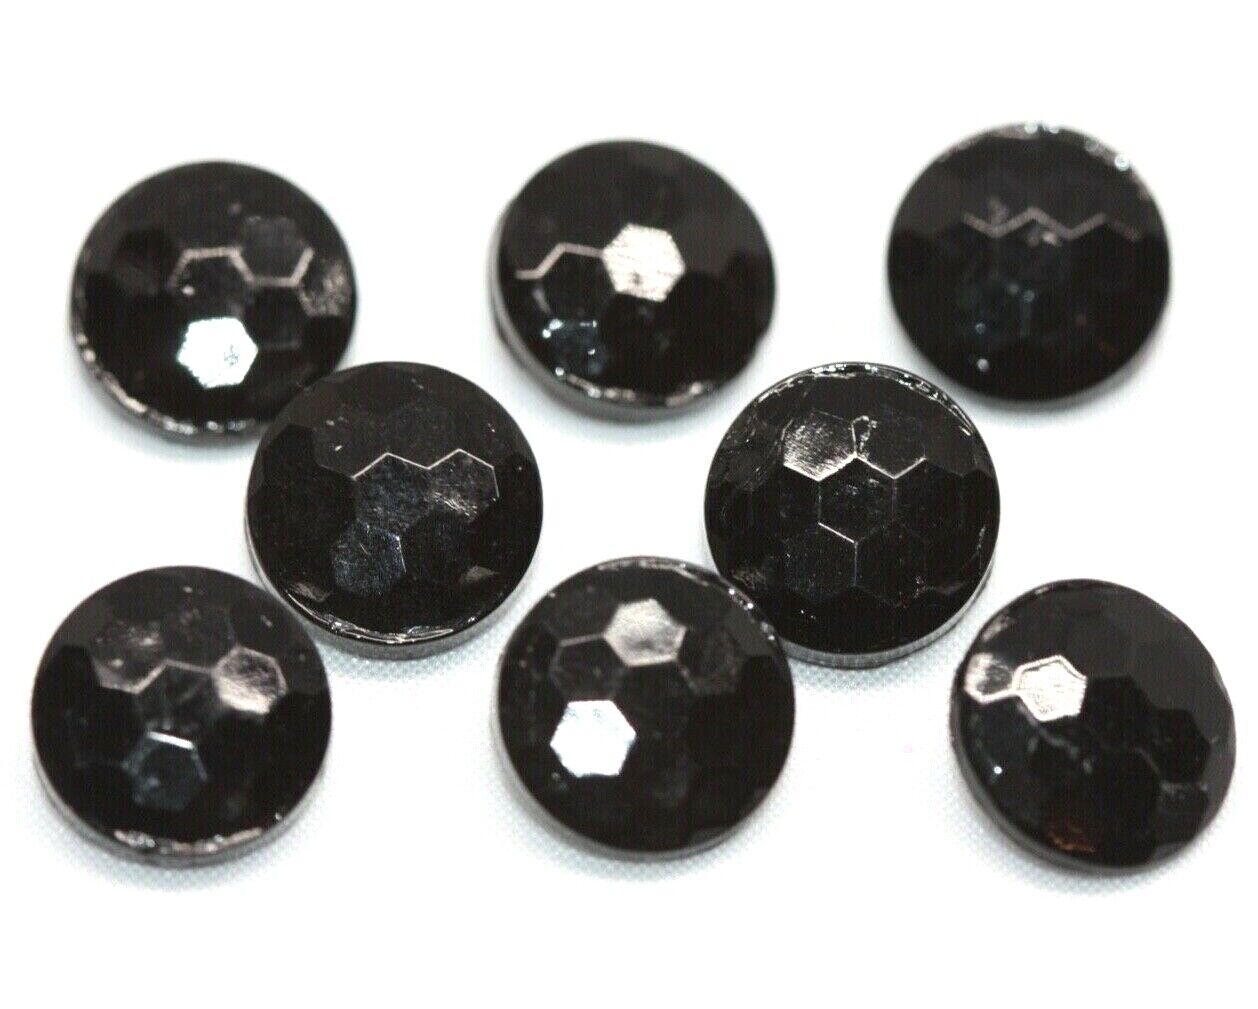 8 Vintage Le Chic Black Glass Honeycomb Buttons Round Faceted Jet Mourning Без бренда